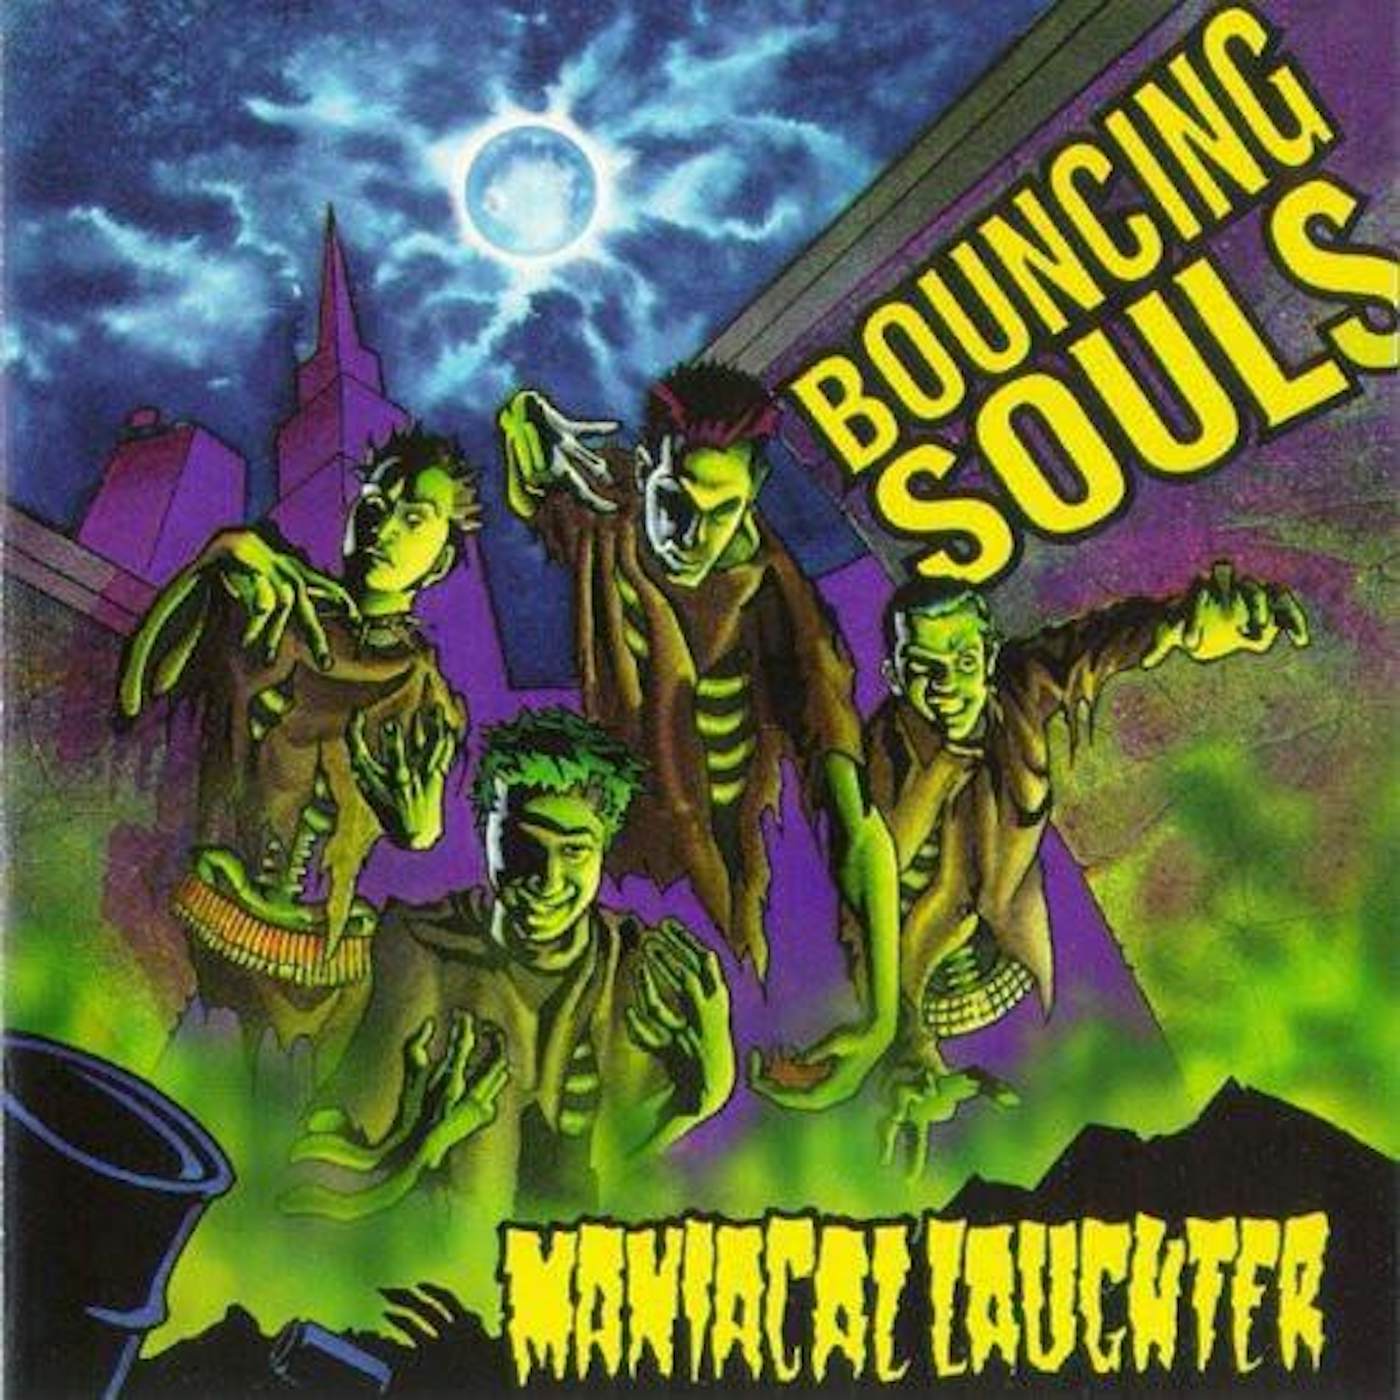 The Bouncing Souls Maniacal Laughter (Orange Vinyl) Vinyl Record